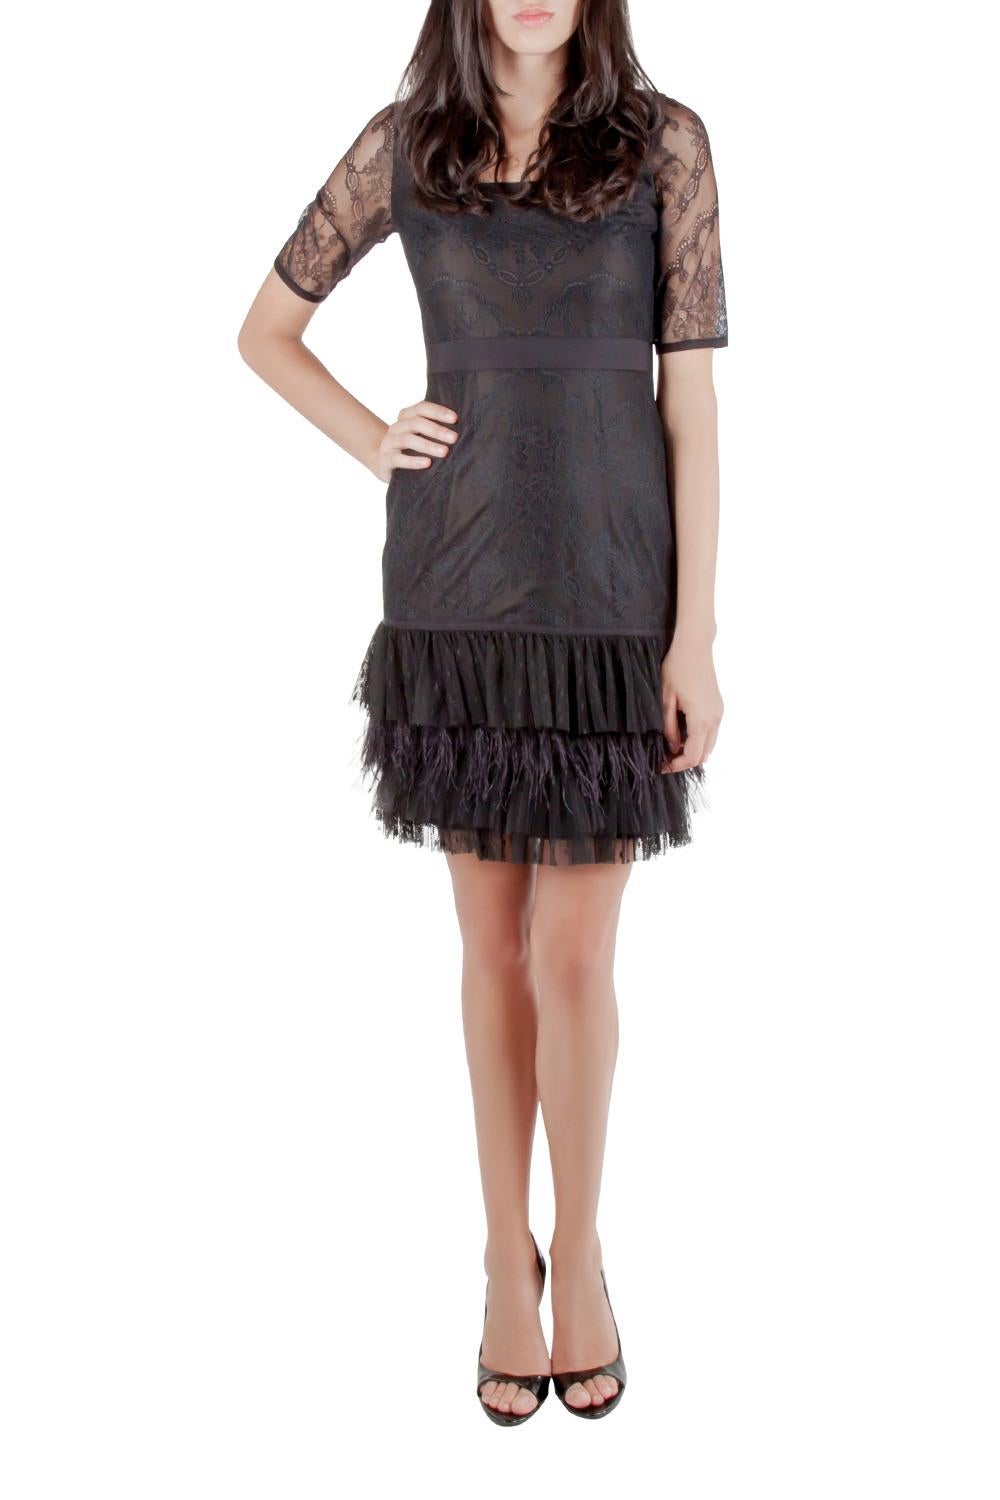 Marchesa has made this fabulous cocktail dress with each element reflecting the designer's fascinating creativity. It is tailored in a combination of black fabrics, featuring an exquisite lace pattern. The piece comes with feather fringes inserted